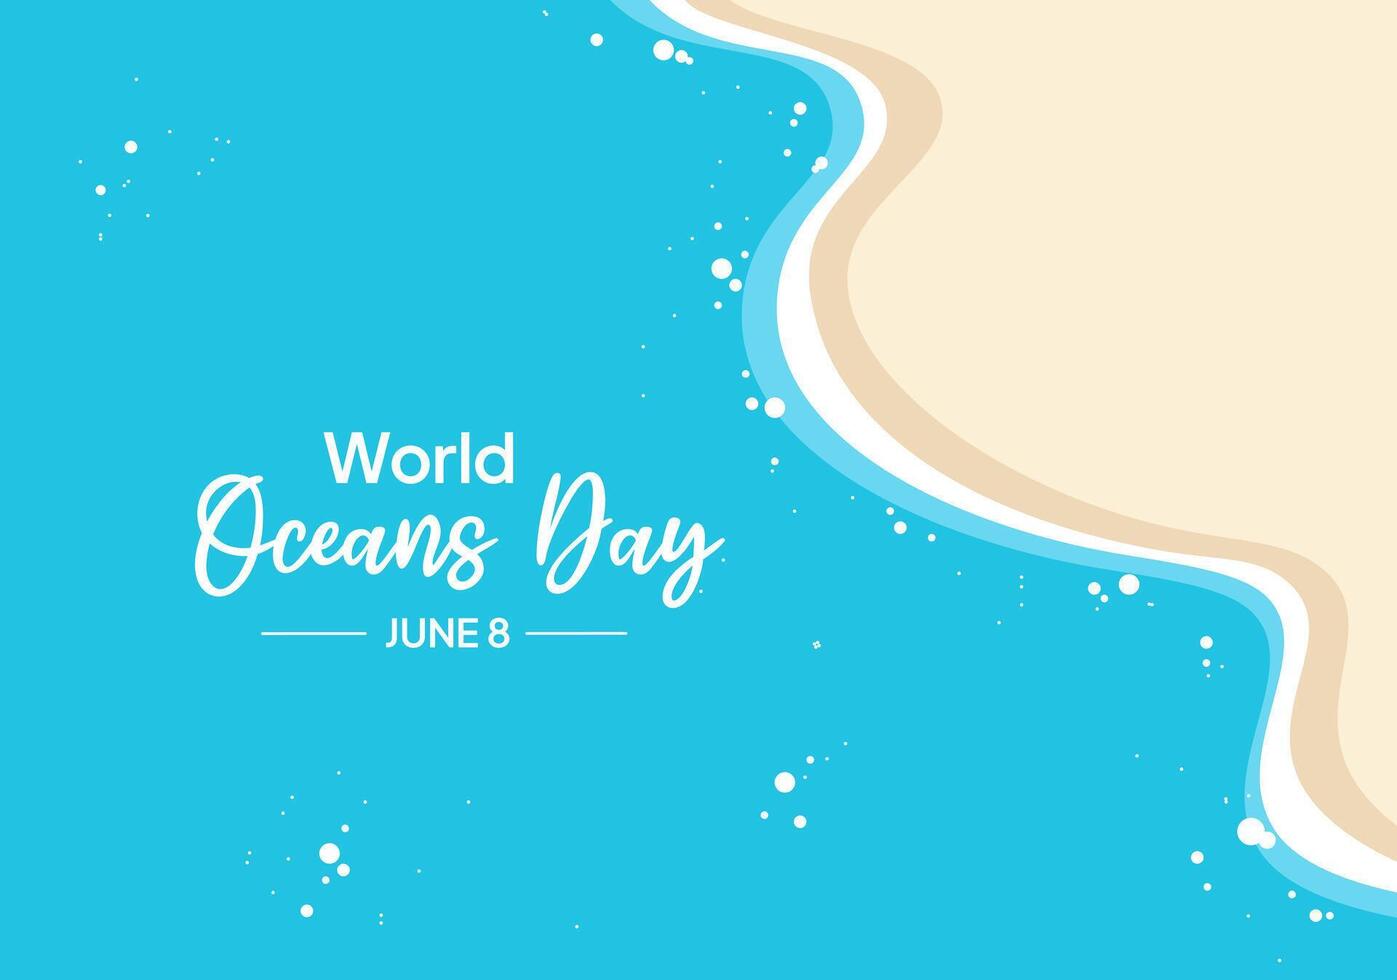 Top view of blue ocean and sandy shore. World Oceans Day. Abstract vector illustration